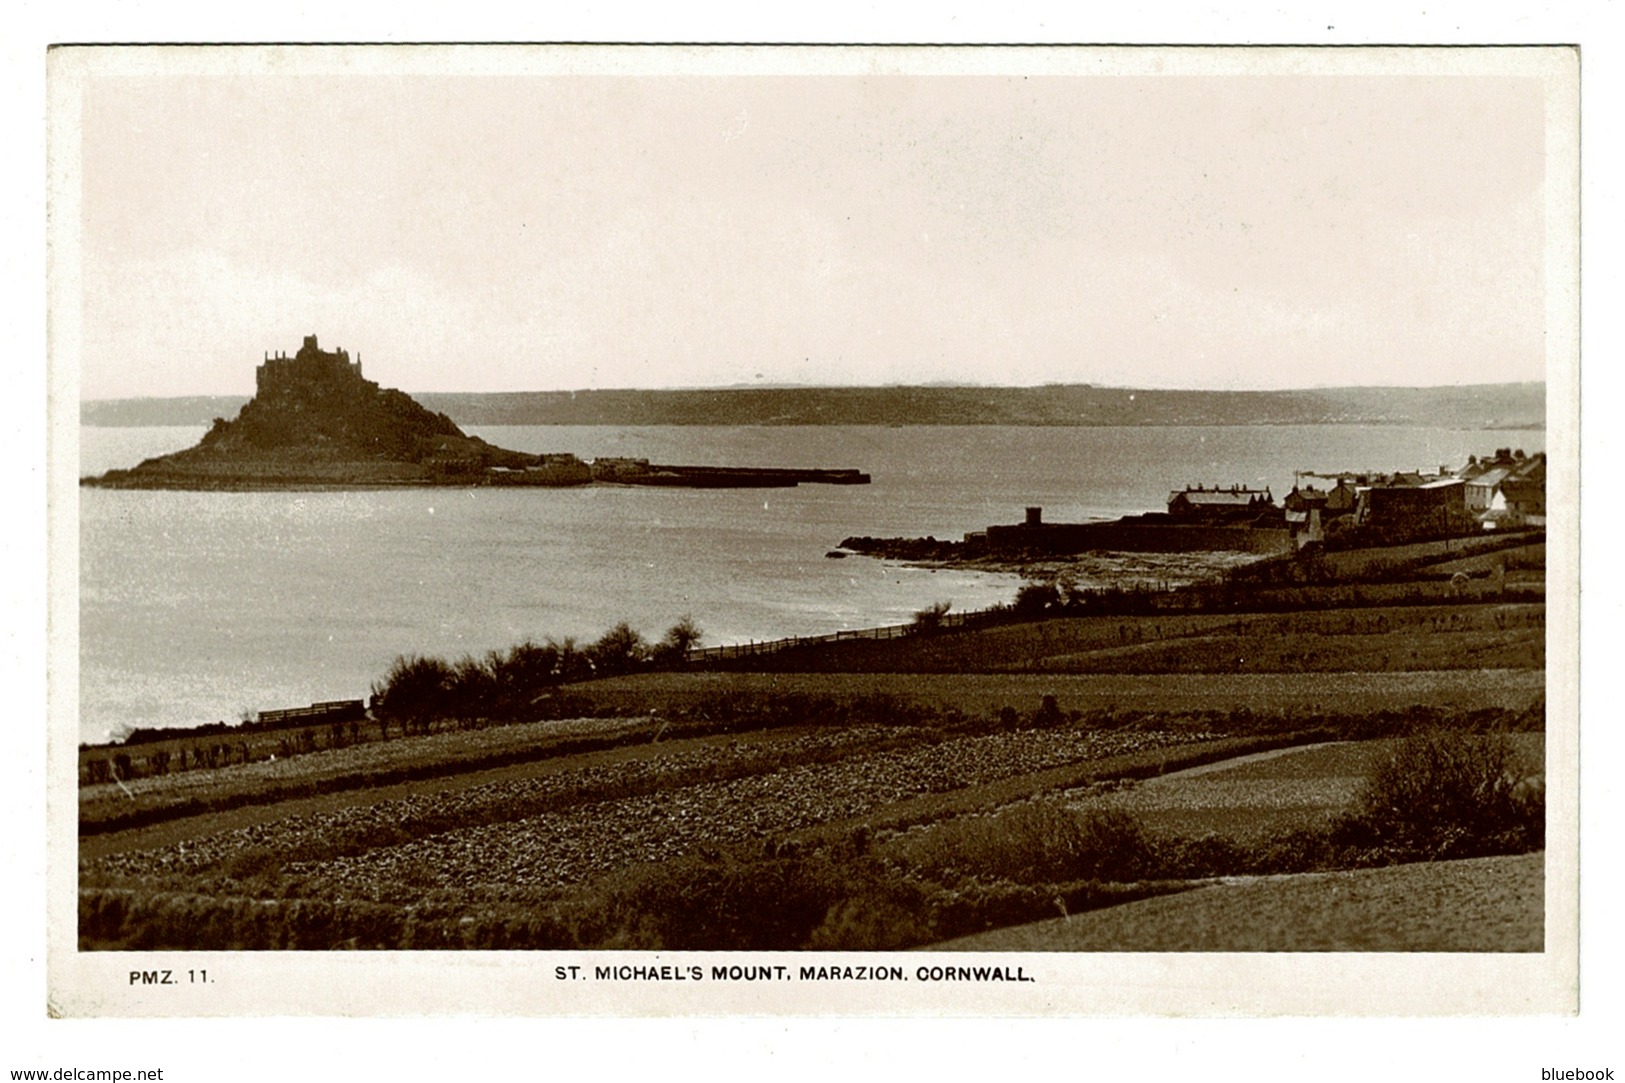 Ref 1373 - Early Real Photo Postcard - St Michael's Mount Marazion Cornwall - St Michael's Mount